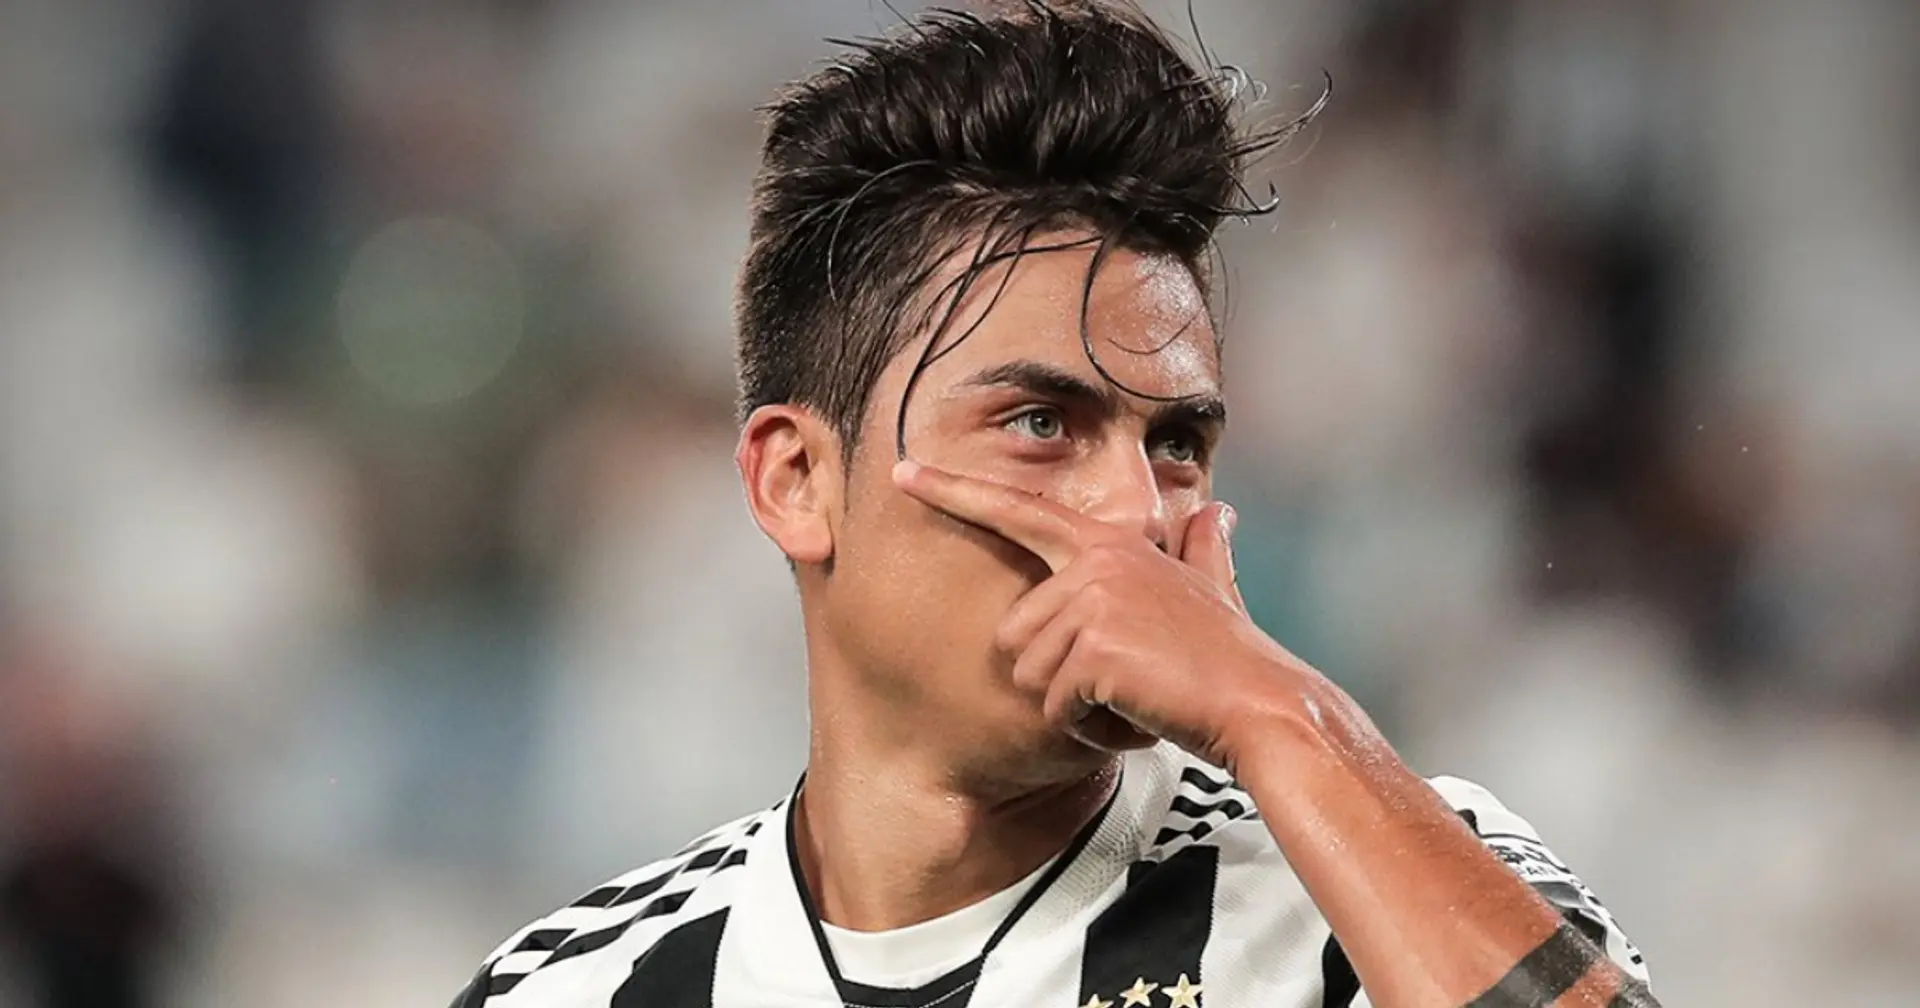 Paulo Dybala is officially a free agent after leaving Juventus